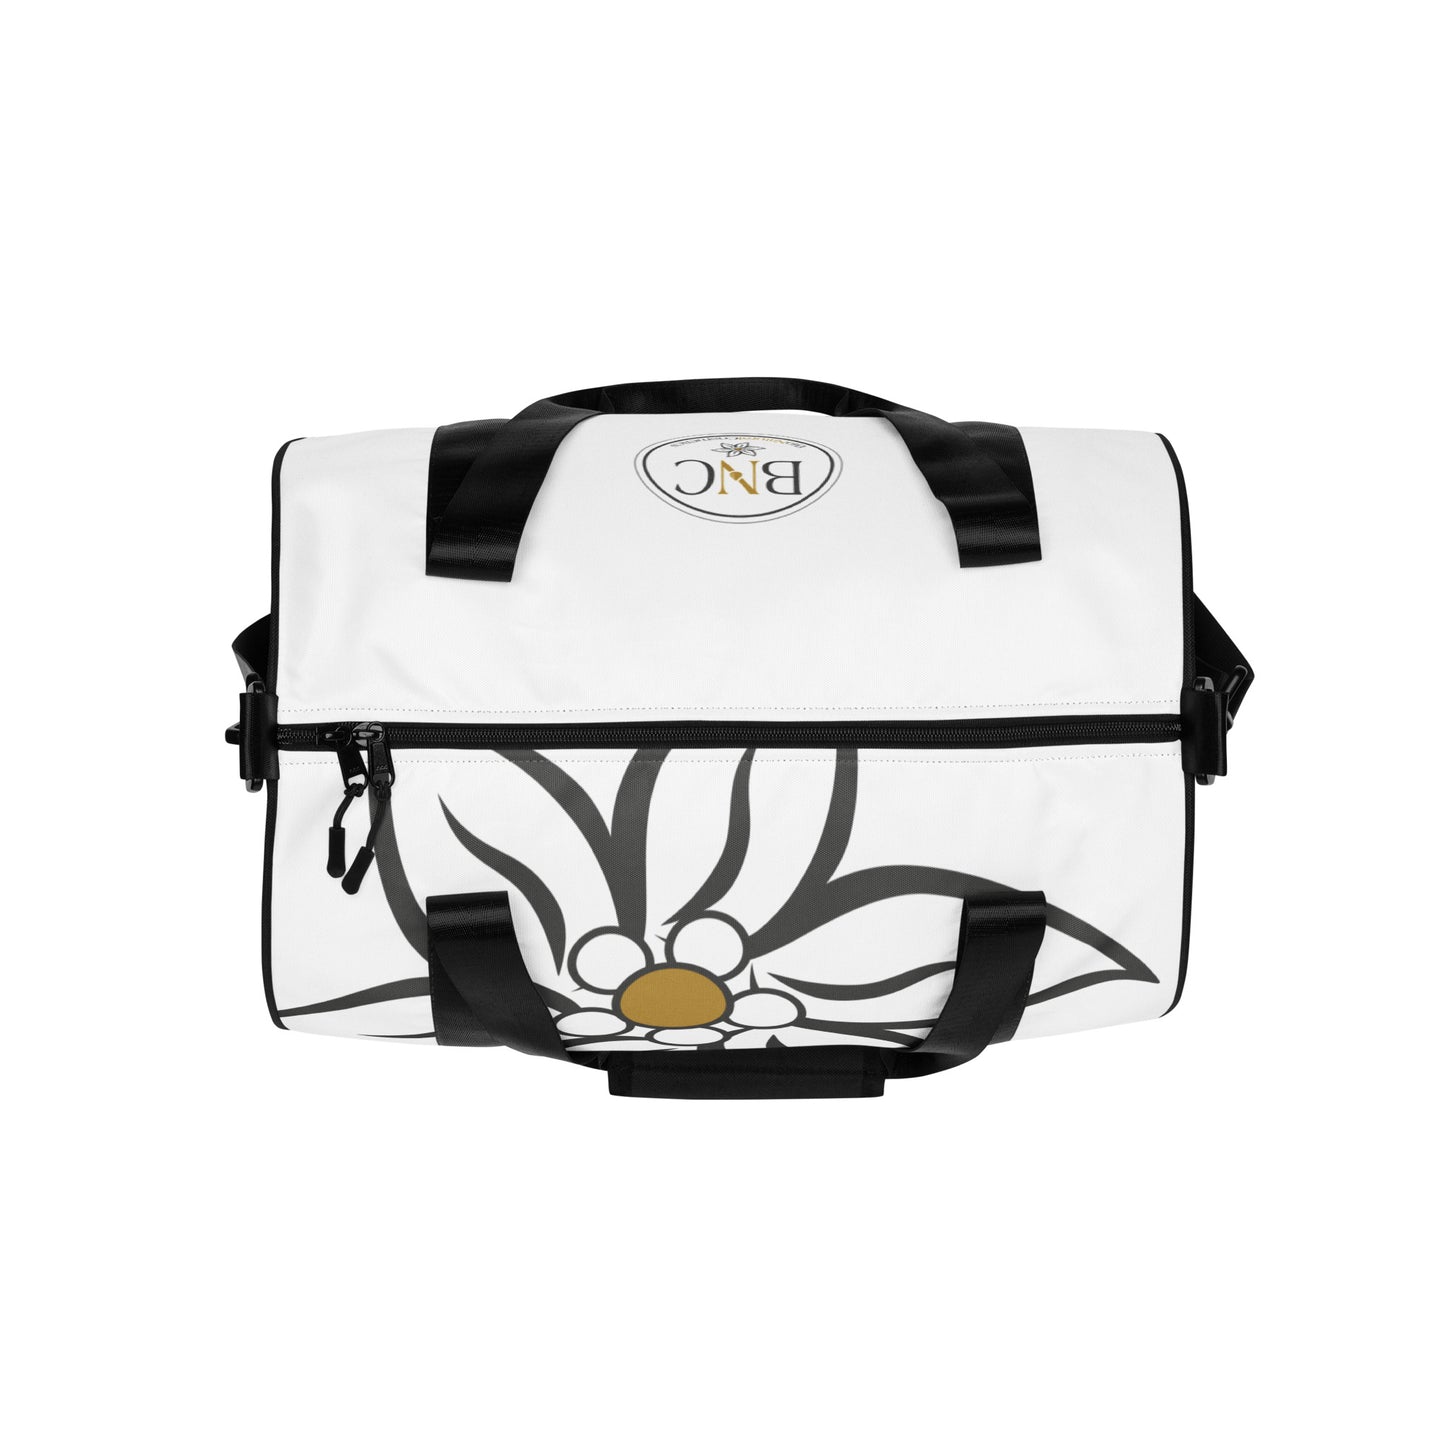 TIME OF VIBES - Sports Bag BNC - €99.00